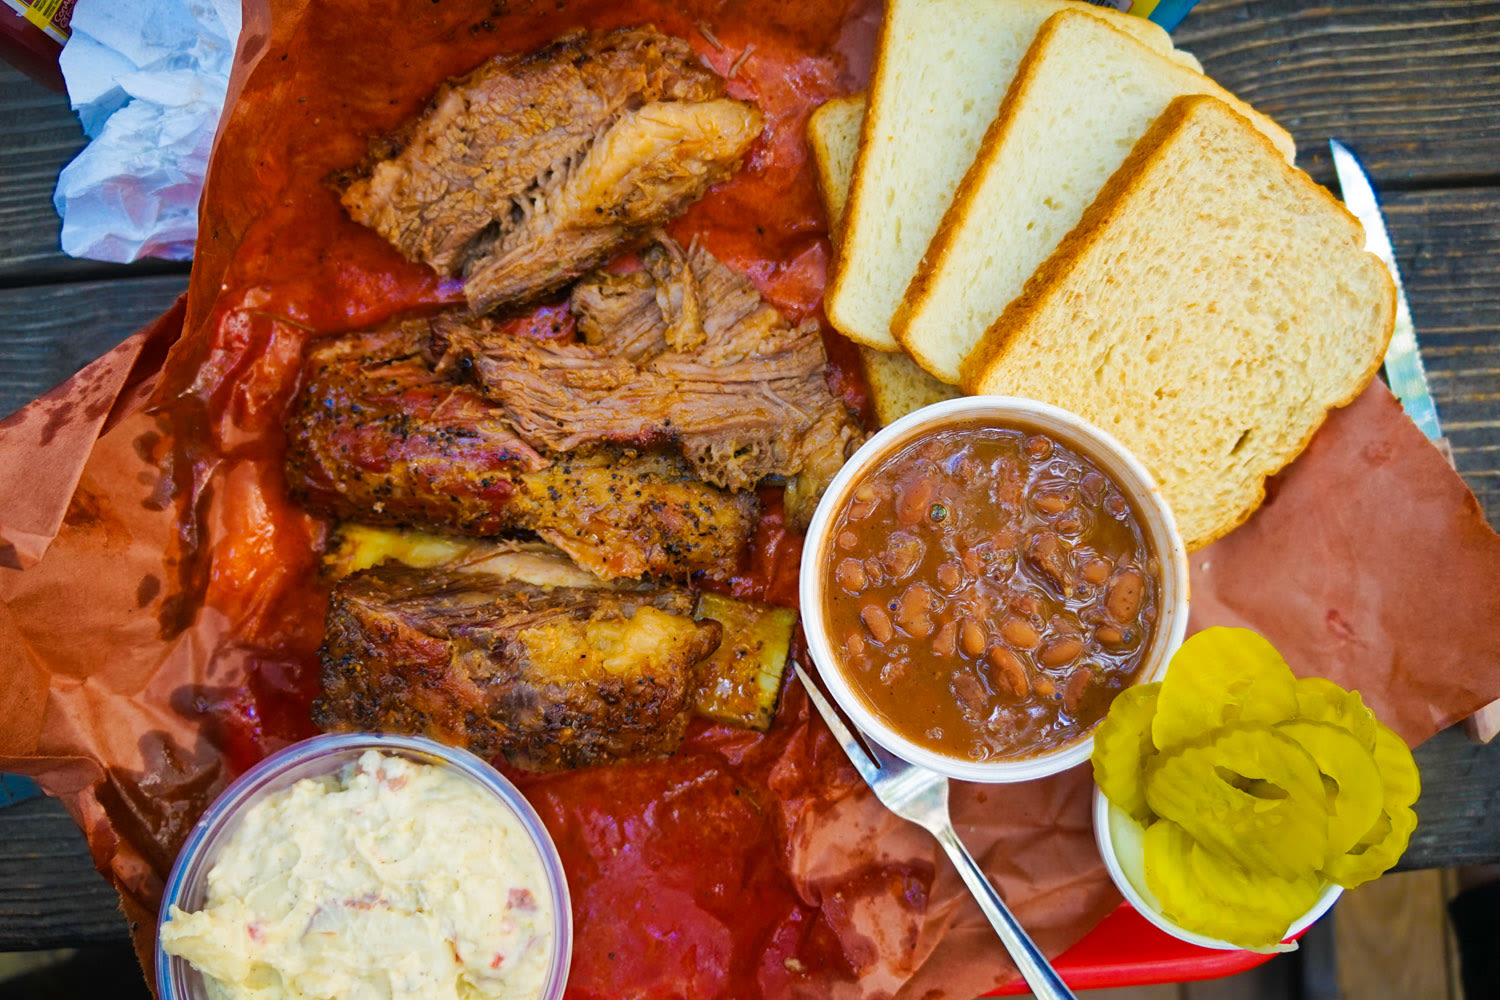 Barbecue food in Austin